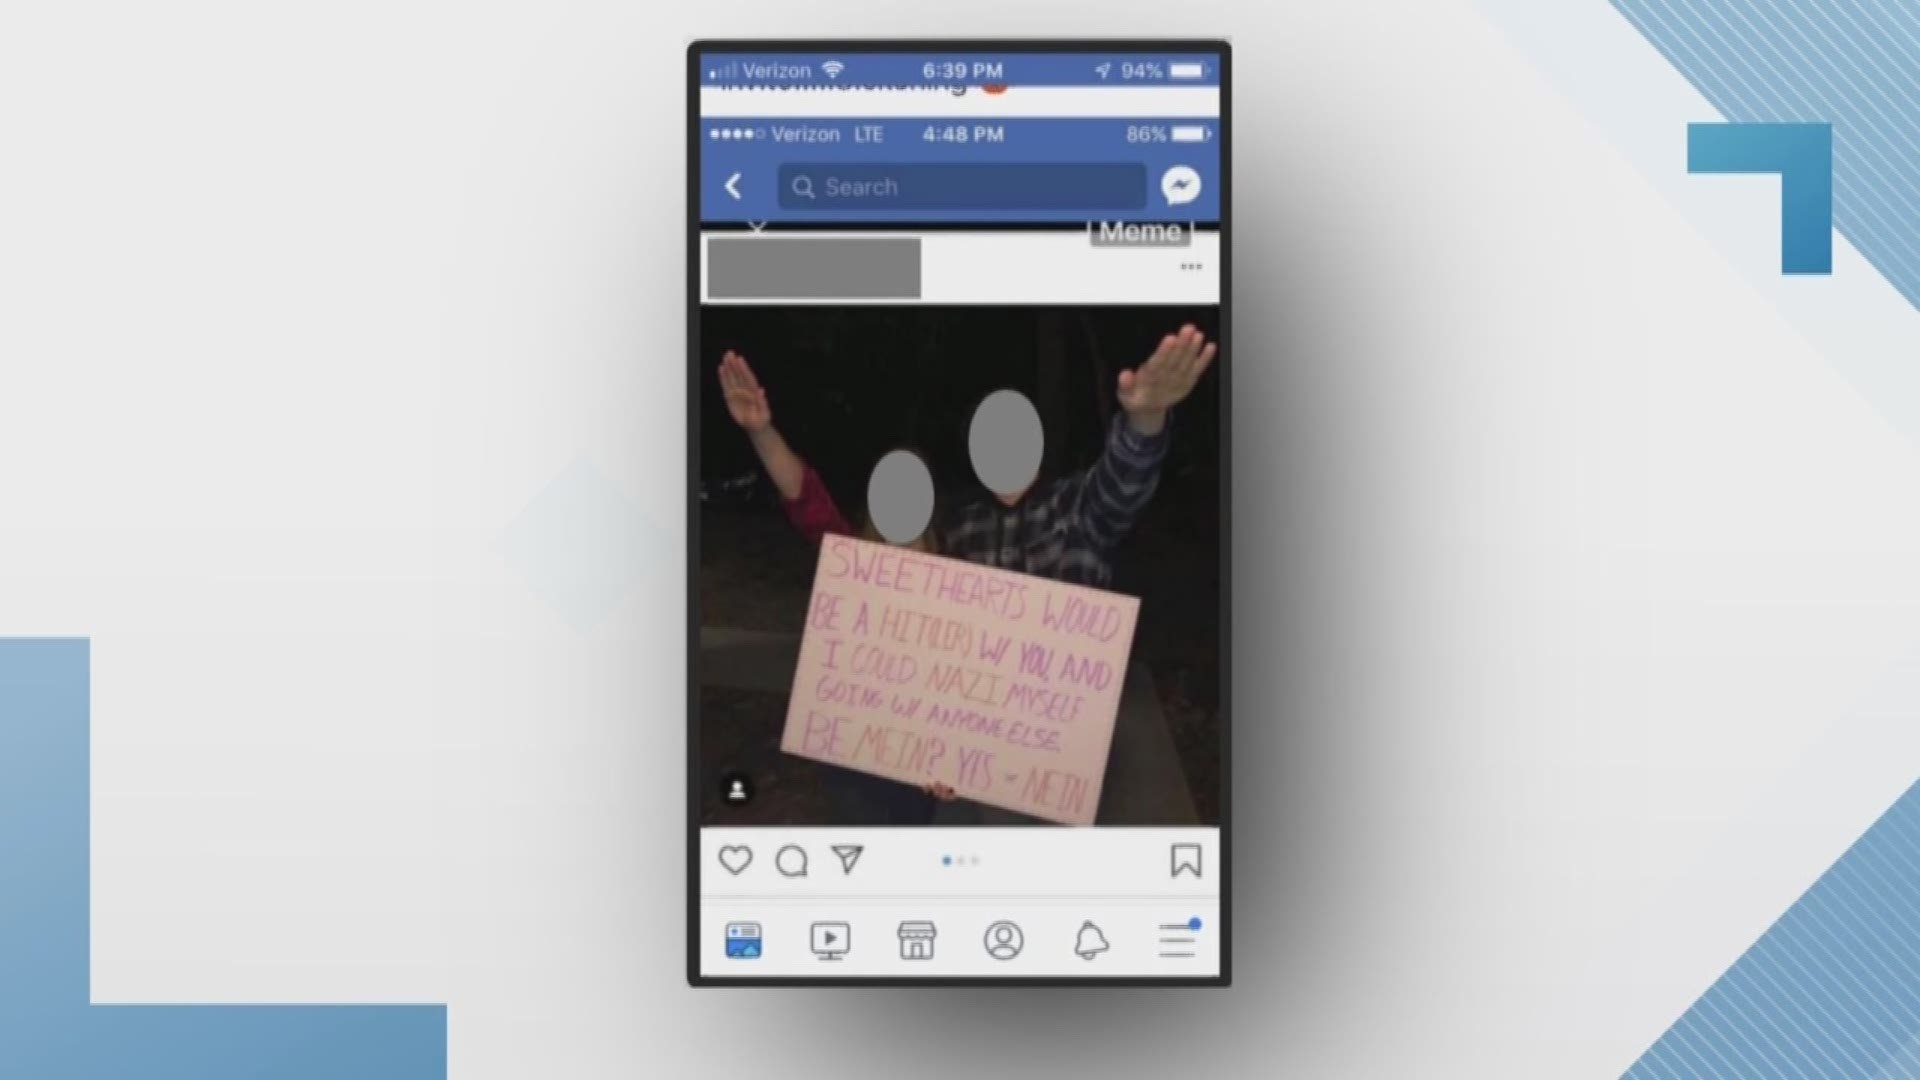 Minnetonka school leaders continue to reassure the greater school community after an anti-Semitic post surfaced on social media Thursday night.